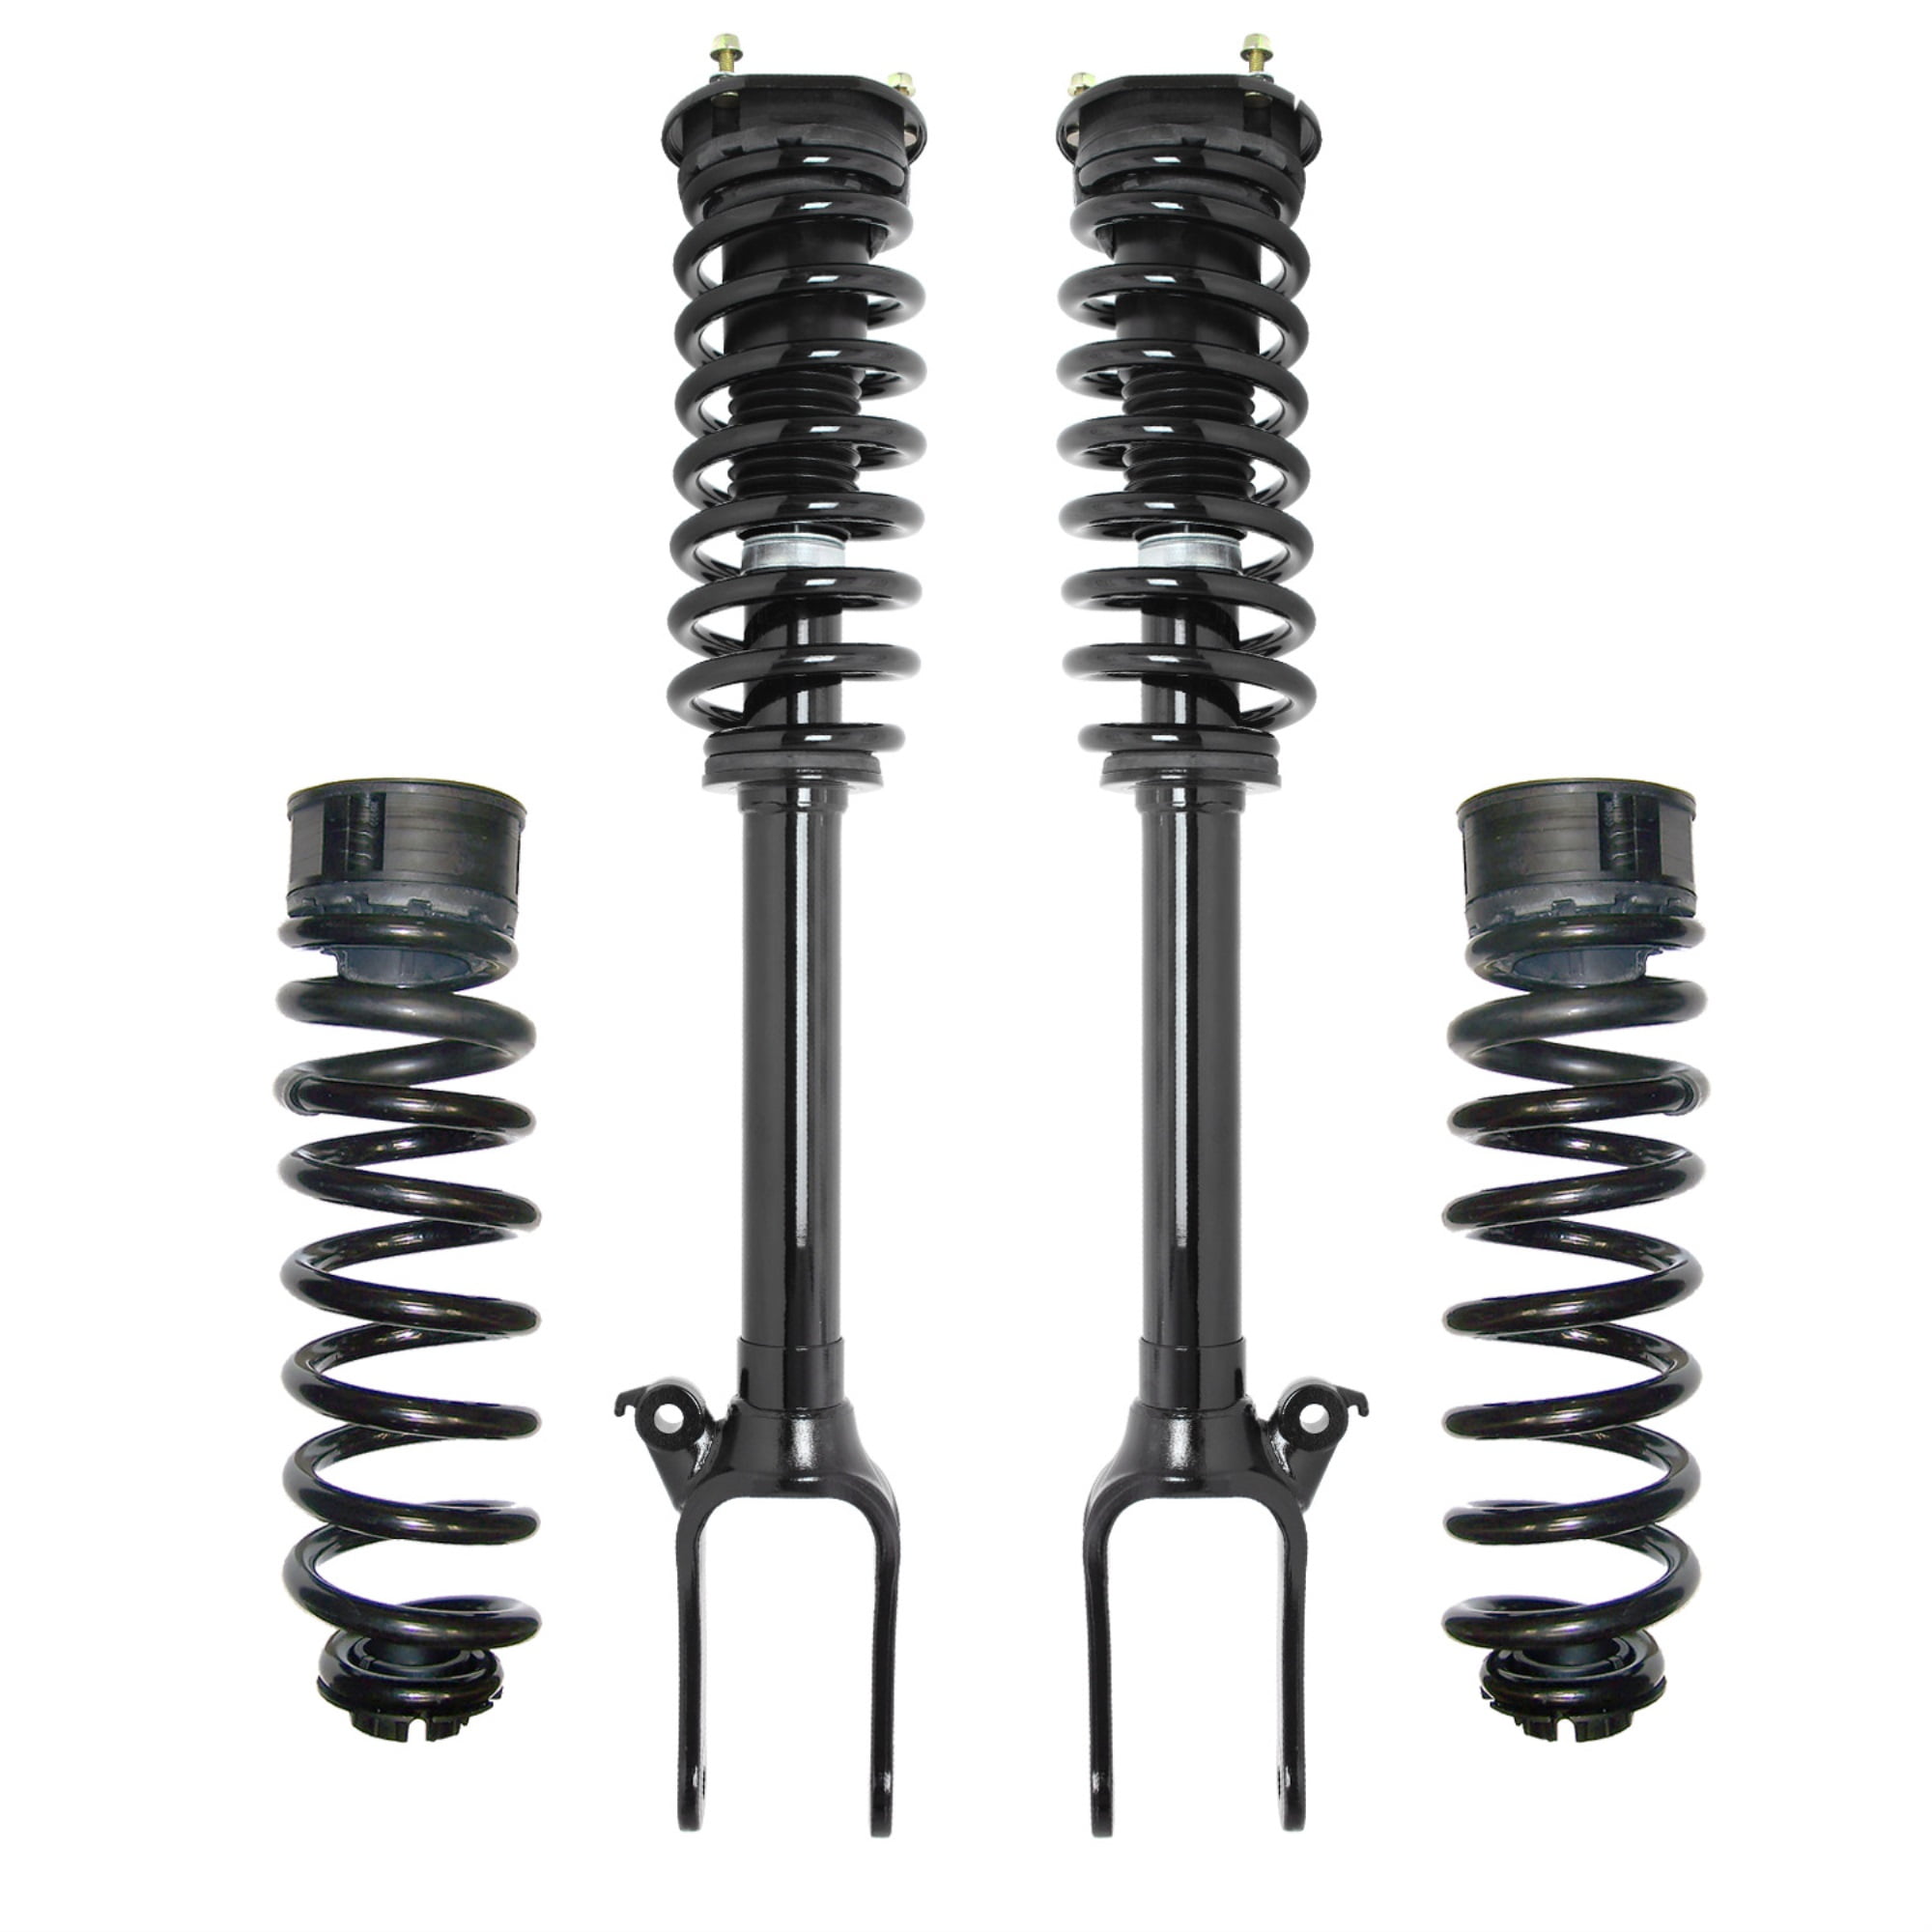 Pair Front Air to Complete Struts & Coil Spring Assemblies Conversion Kit Fits 2008-2012 Mercedes GL550 